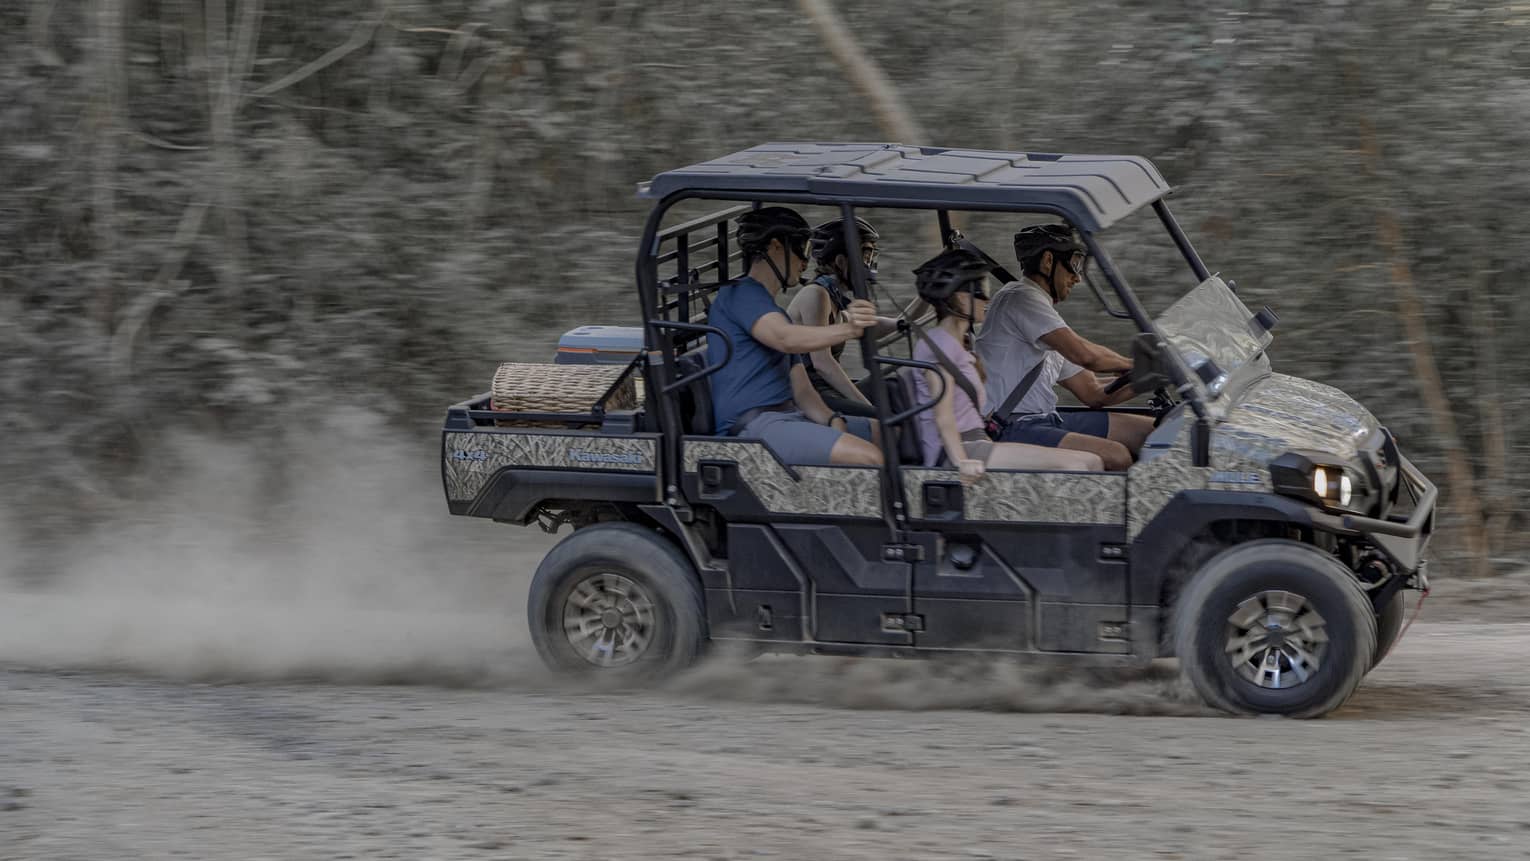 Four people speed along a dirt road in a 4x4 vehicle